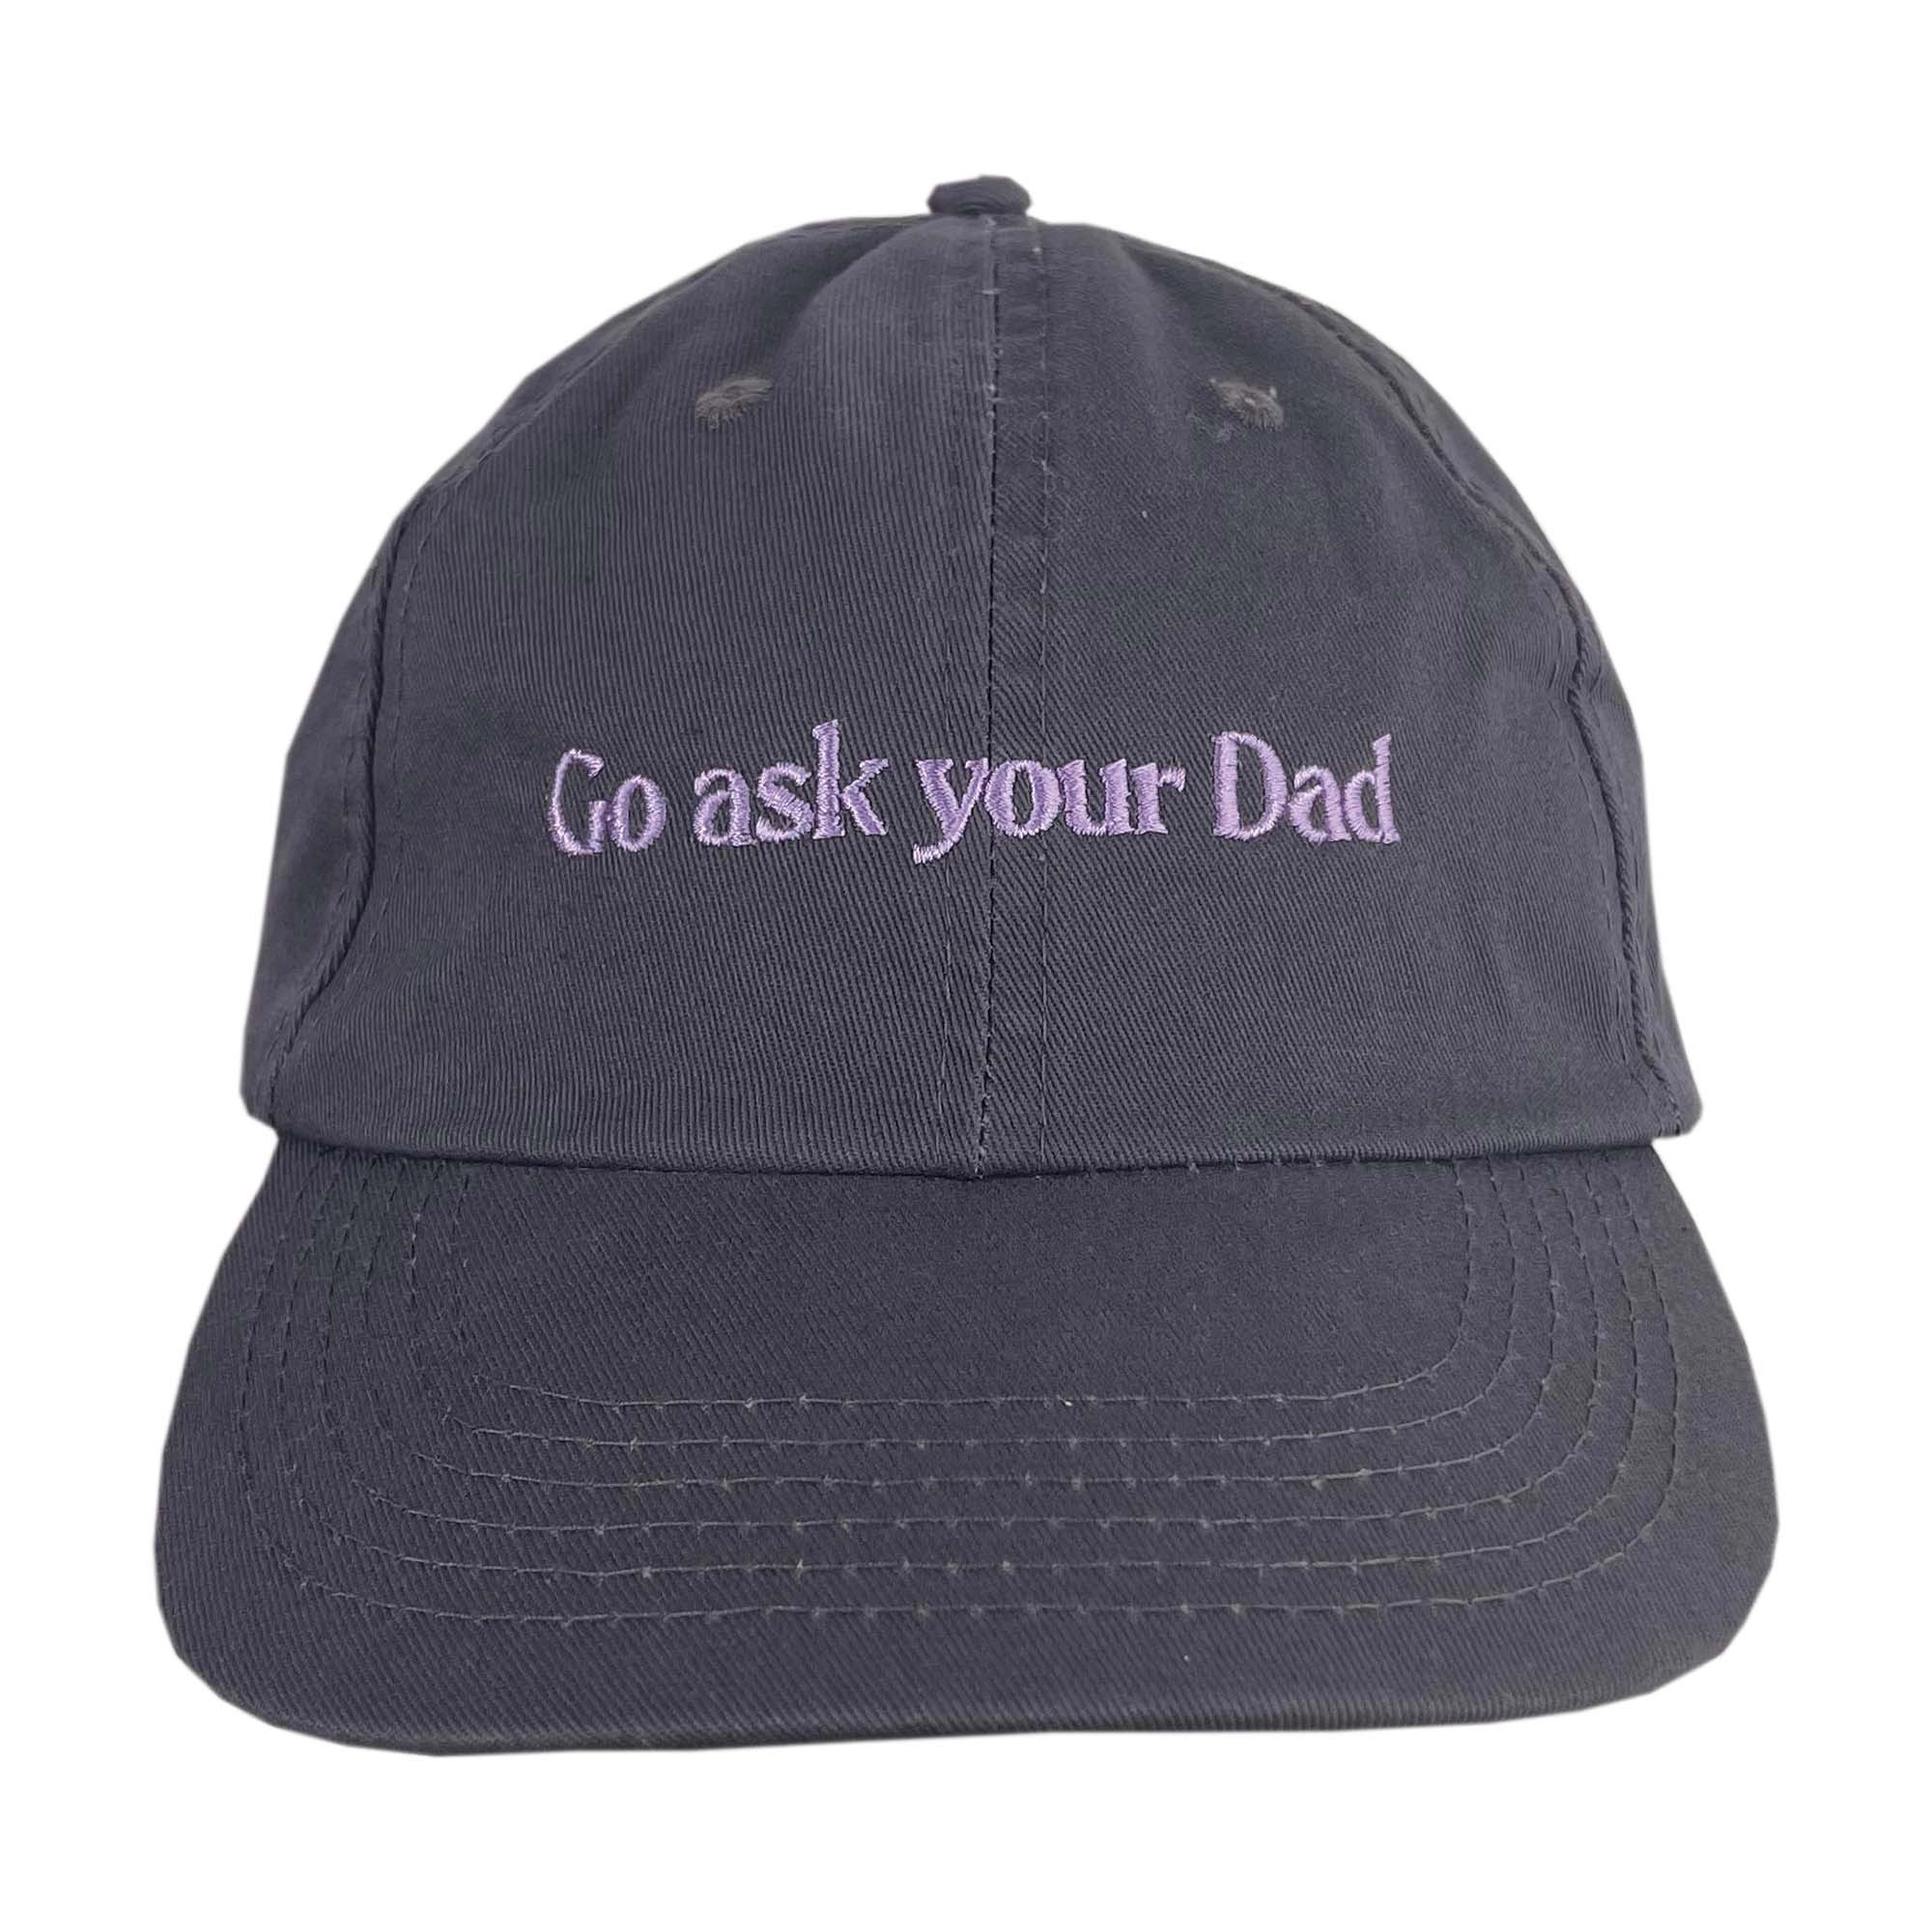 GO ASK YOUR DAD CHARCOAL DAD HAT